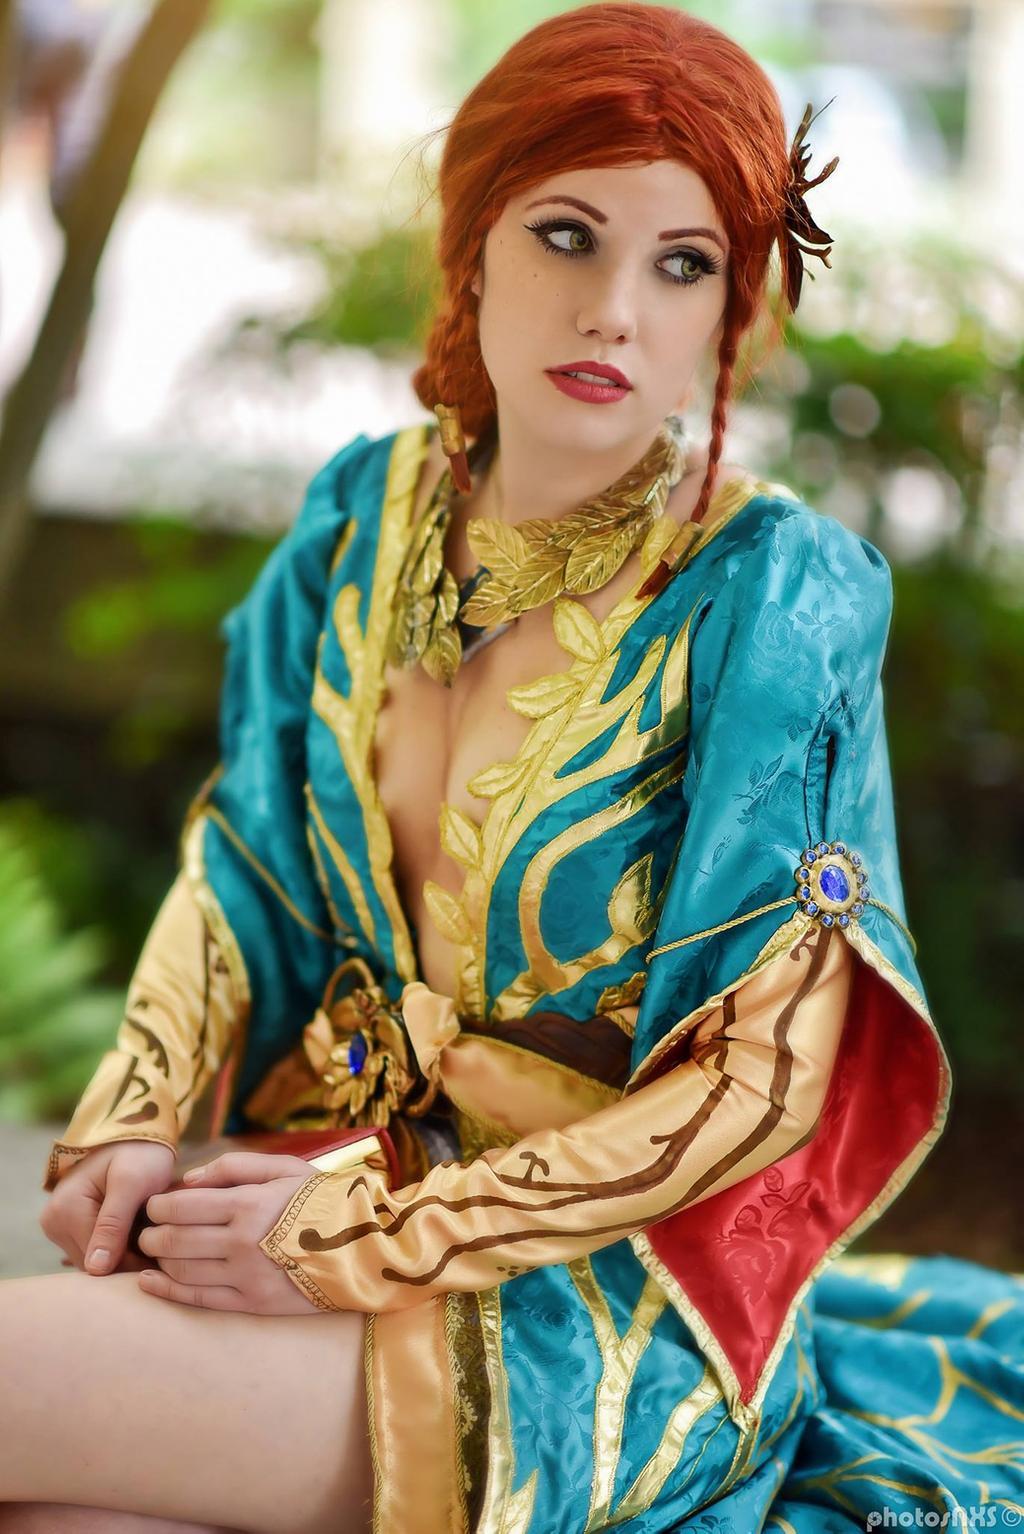 60+ Hot Pictures Of Triss Merigold From The Witcher Series Are Delight For Fans 396